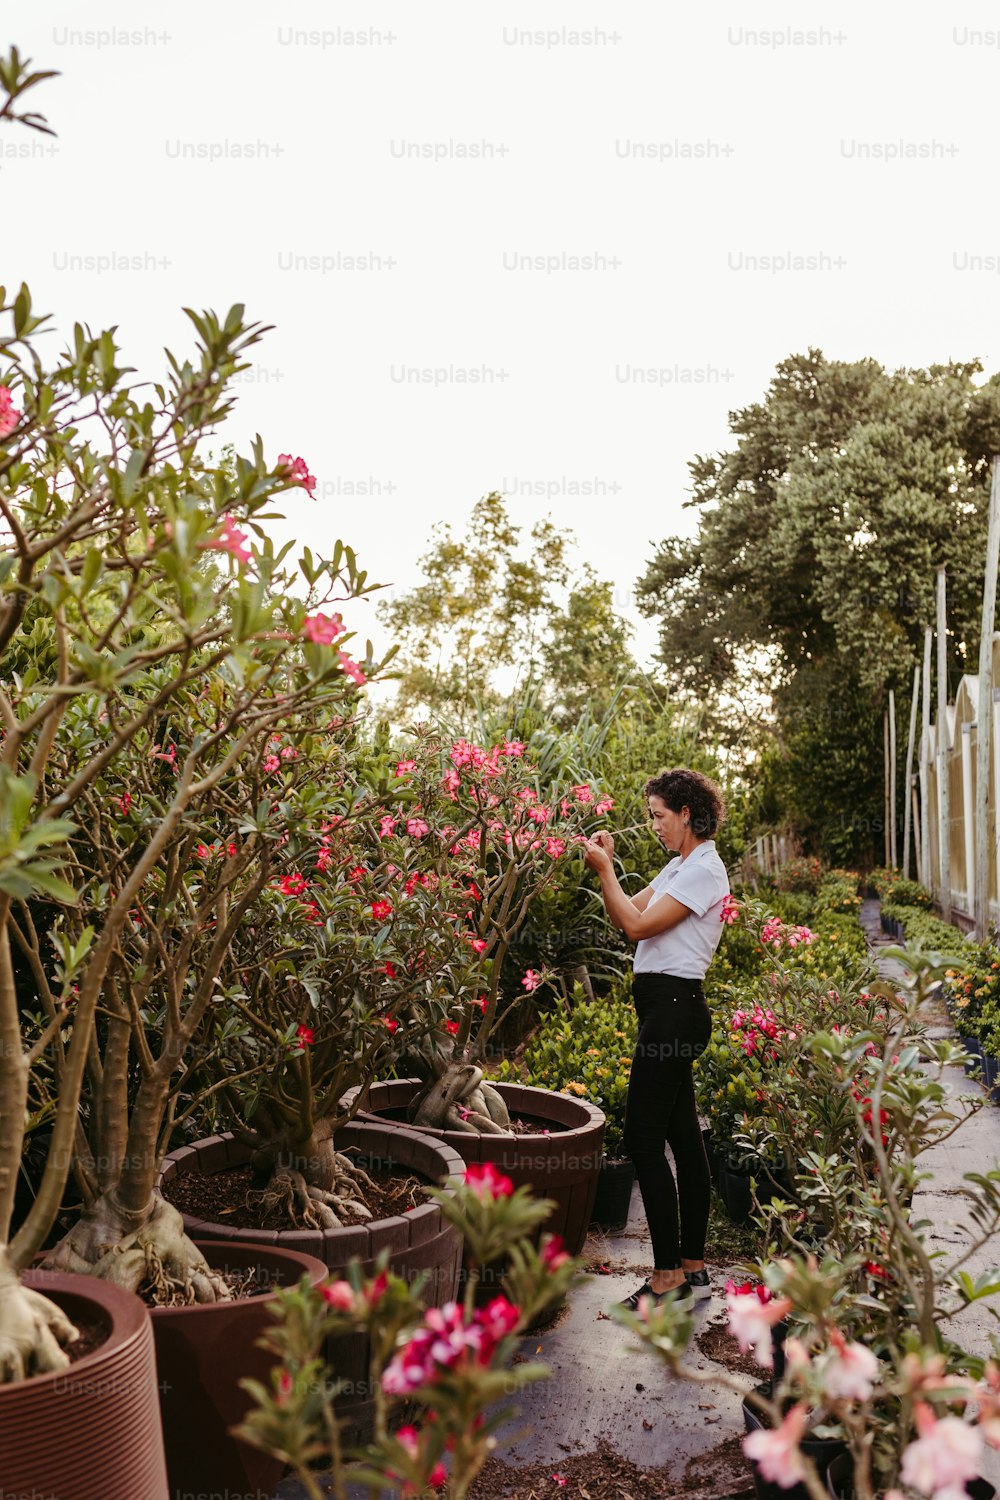 a woman standing in a garden filled with potted plants